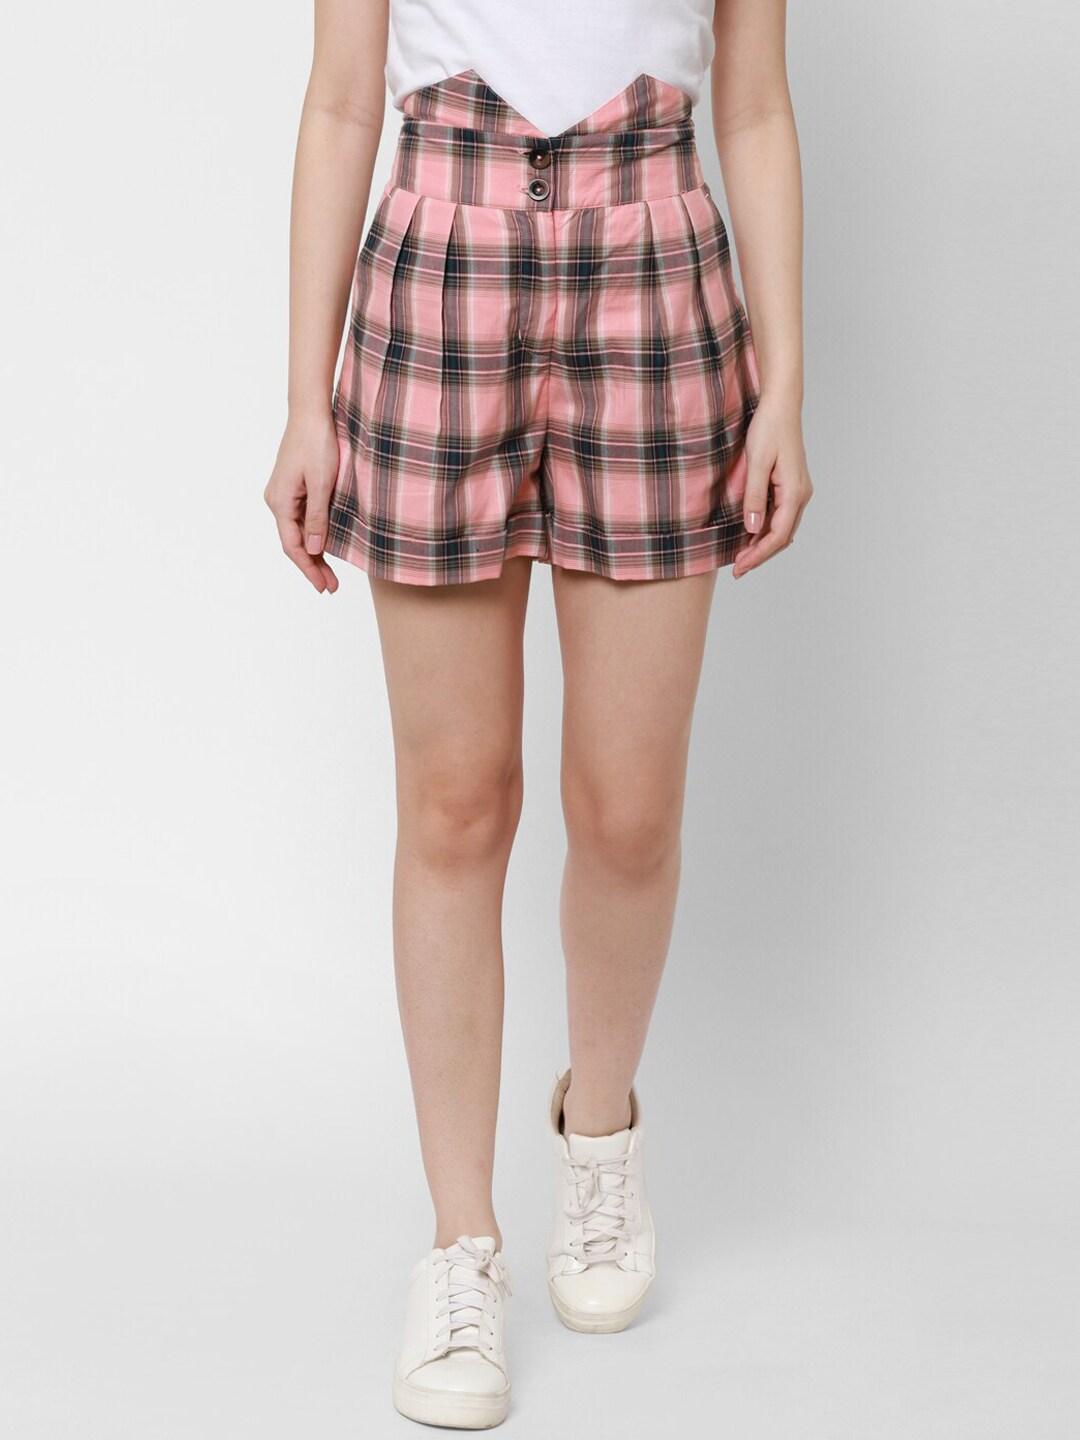 HOUSE OF KKARMA Women Pink Checked Shorts